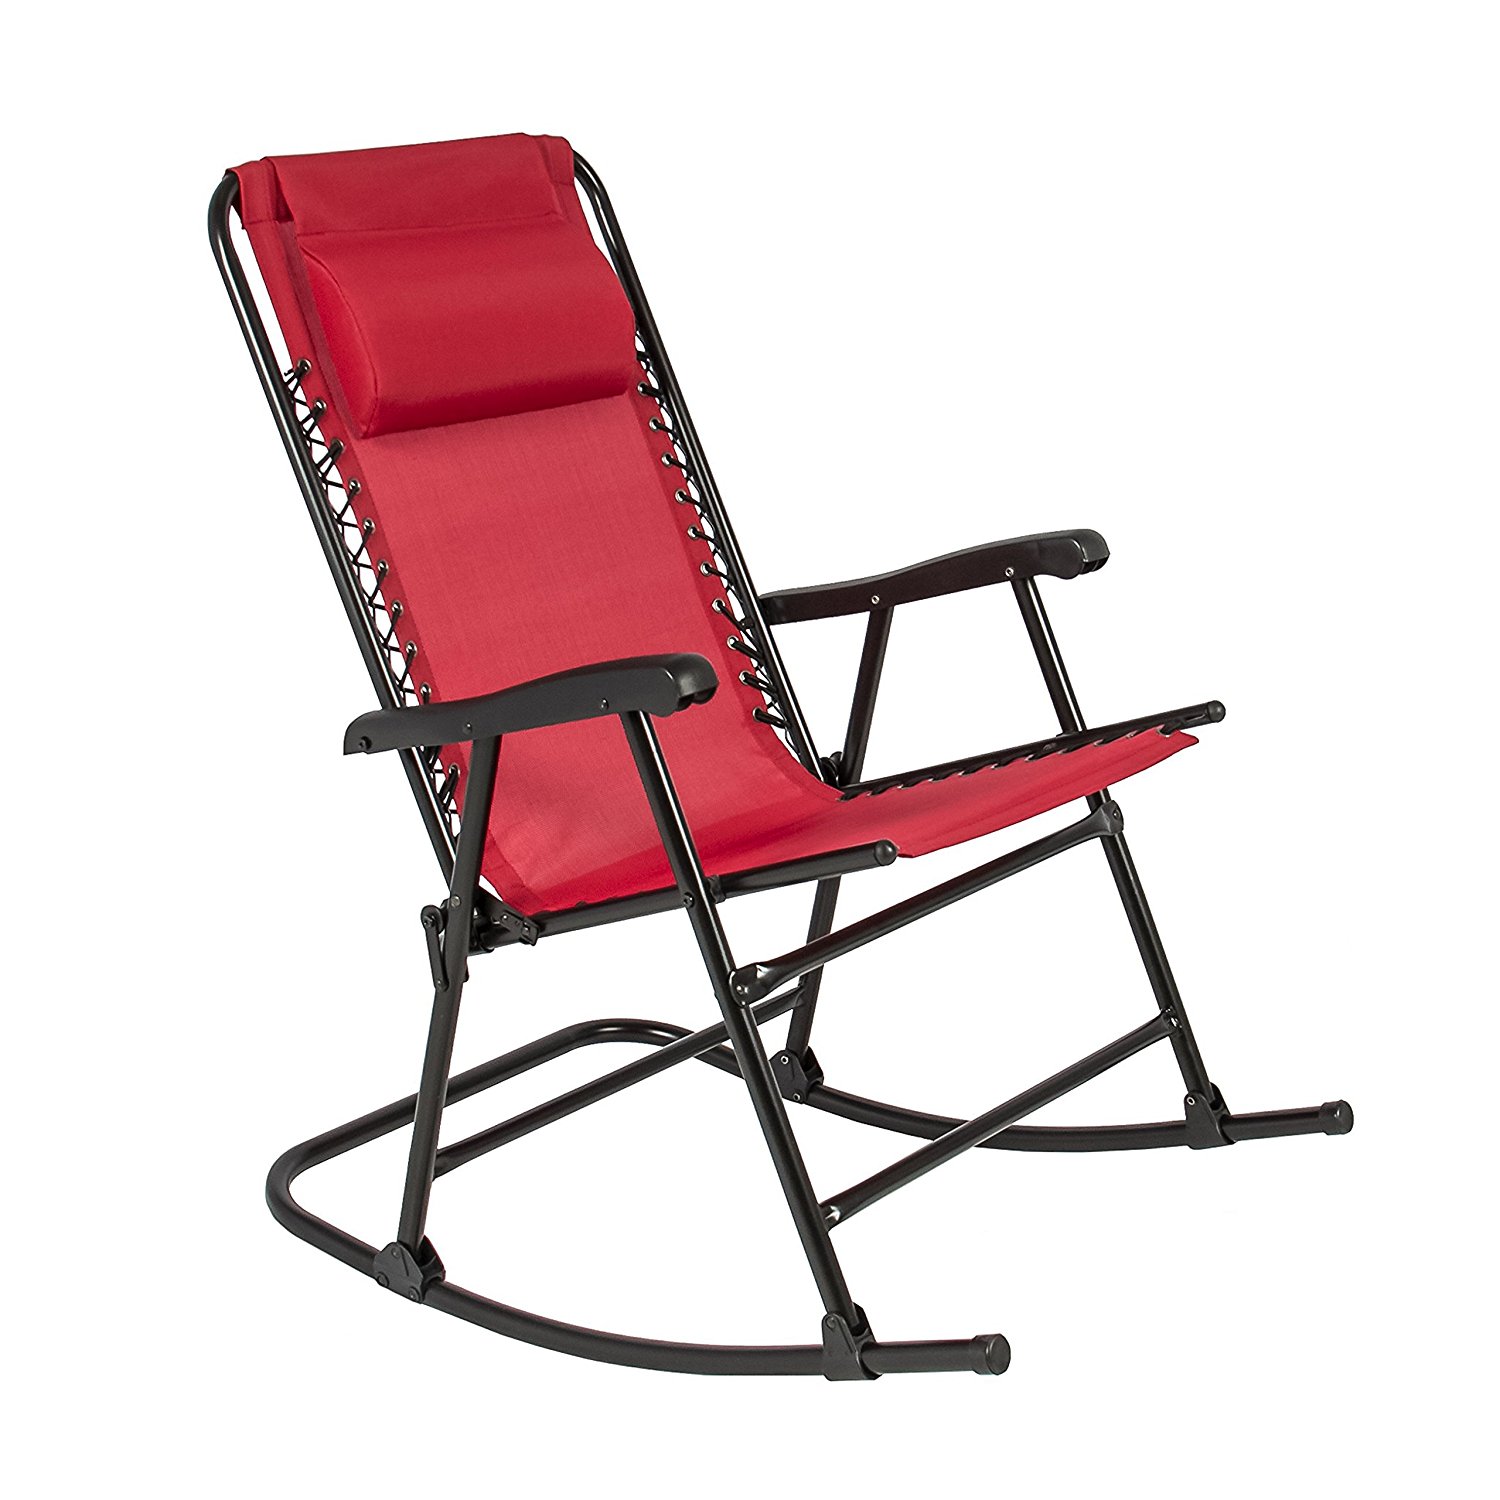 Amazon.com : Best Choice Products Folding Rocking Chair Foldable ...